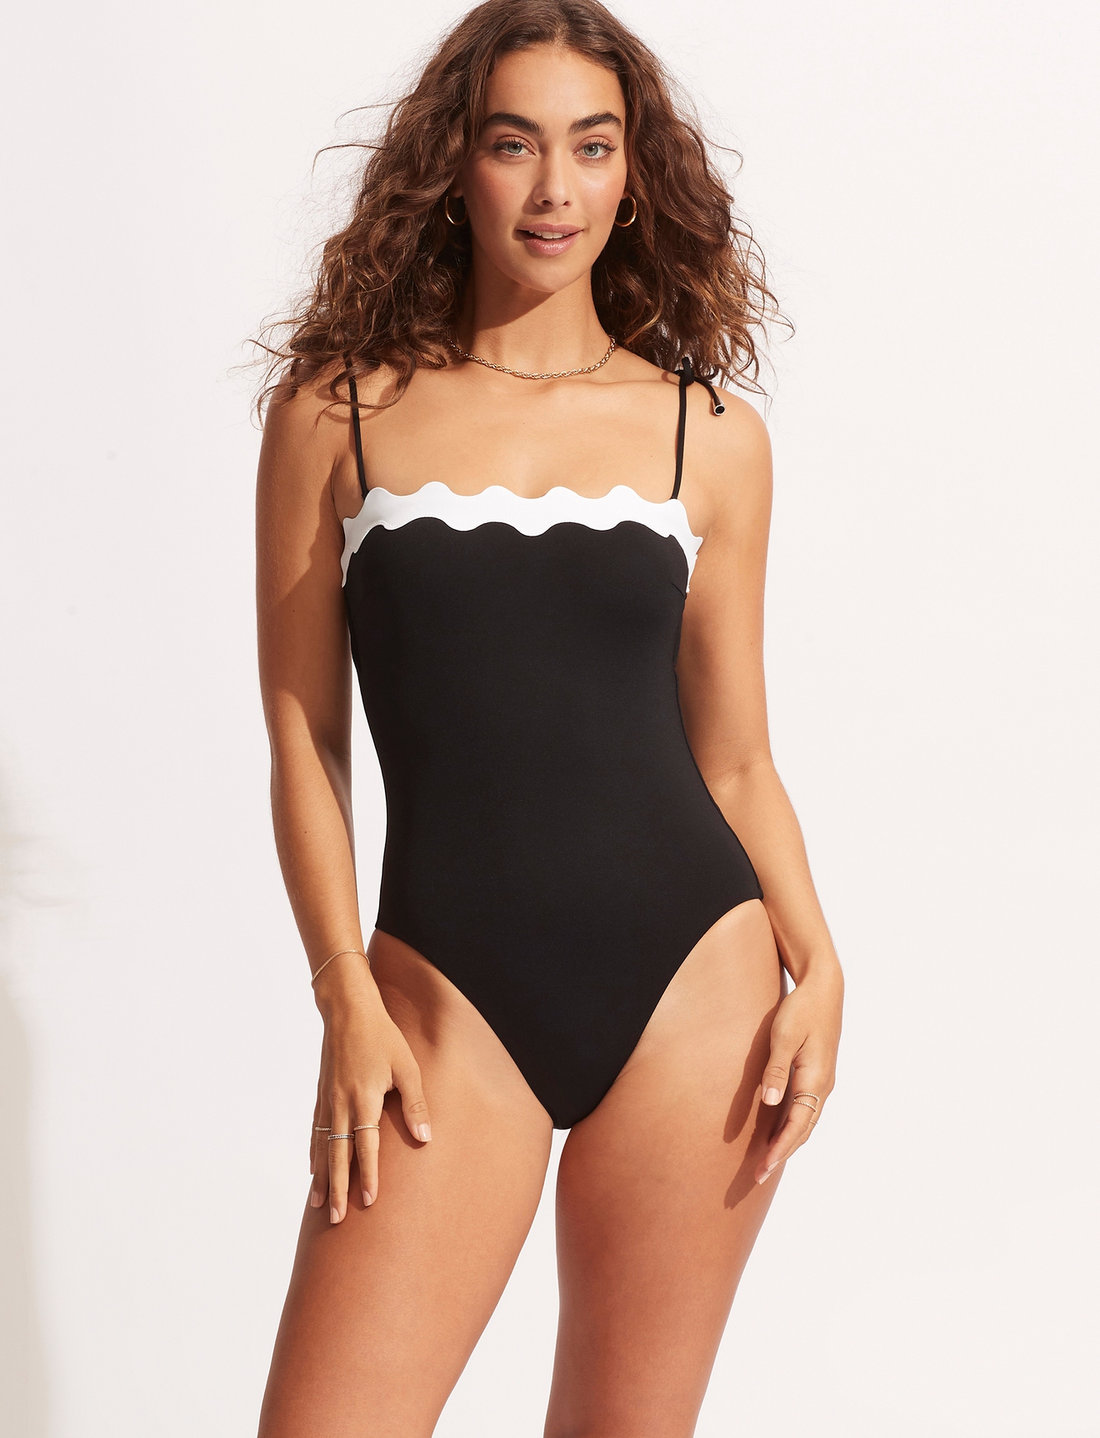 Beenmerg gips Ontspannend Seafolly Gia Ric Rac One Piece - Badpakken - Boozt.com